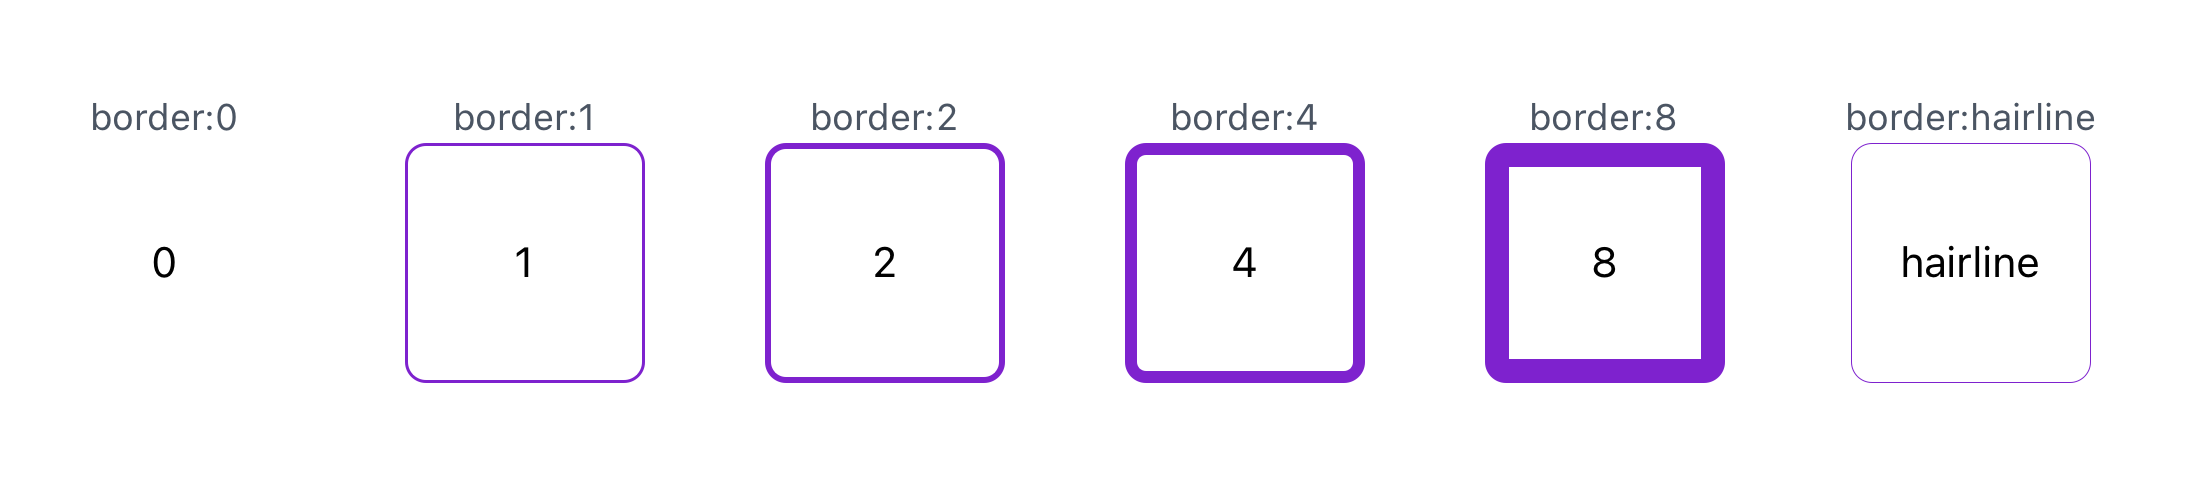 A screenshot of the default border sizes scale shown in a simulator